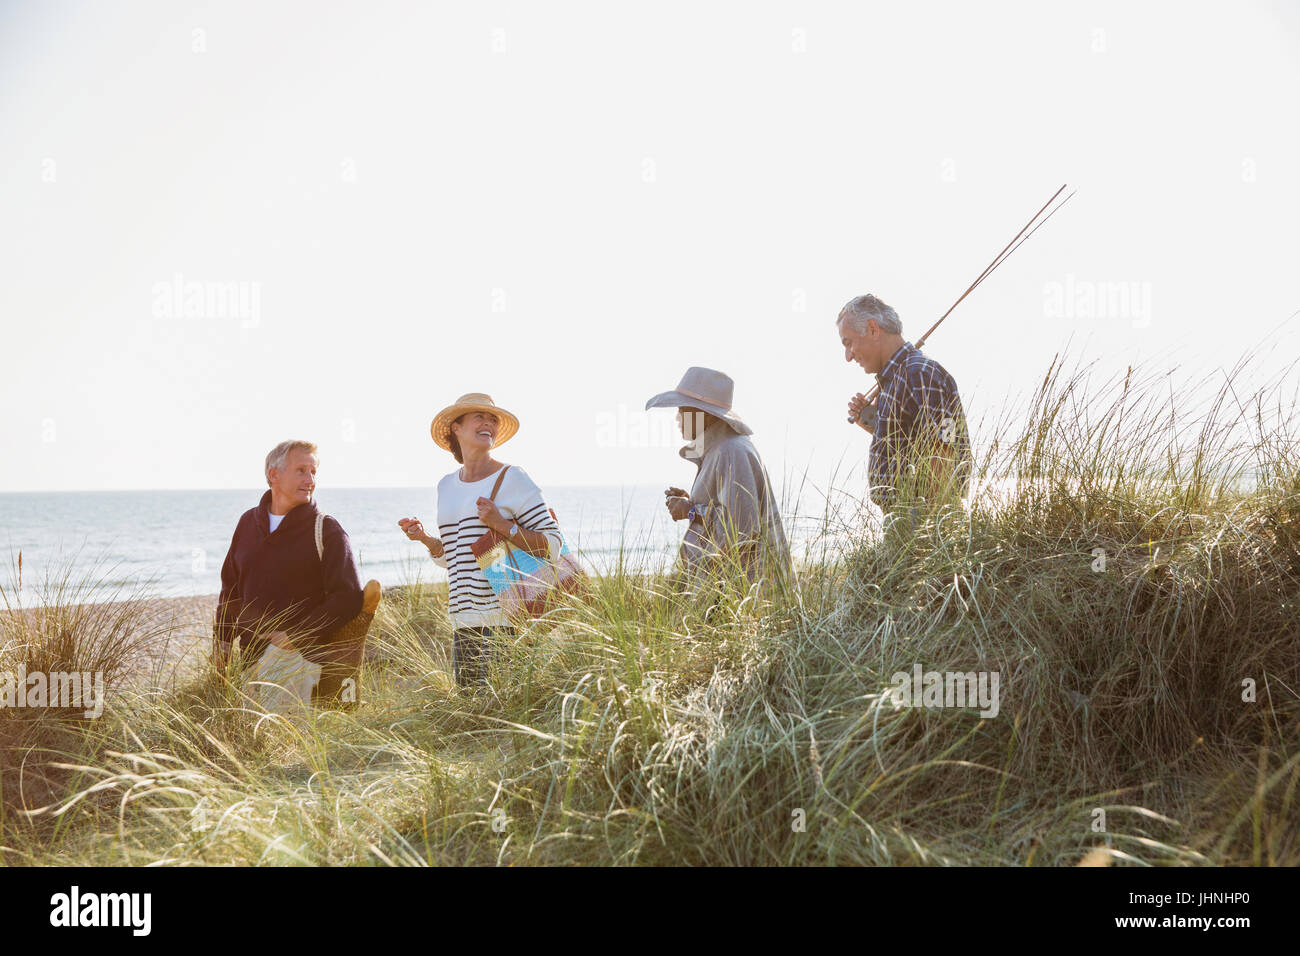 Senior couples with fishing pole walking in sunny beach grass Stock Photo